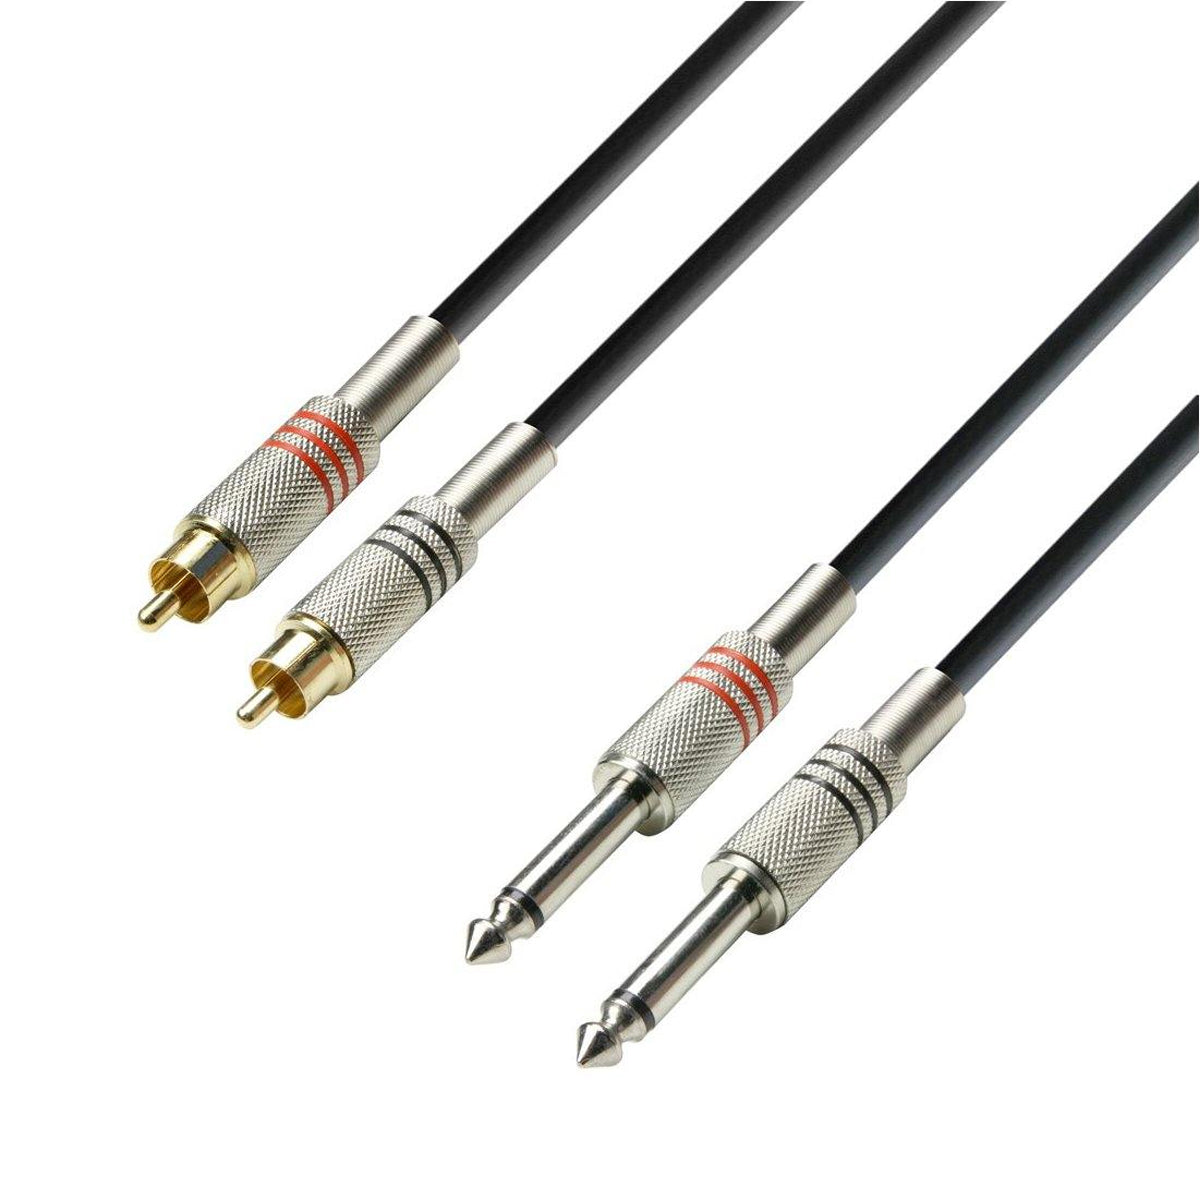 Adam Hall Cables K3 YVPP 0300 - Audio Cable 6.3mm Jack stereo to 2 x 6